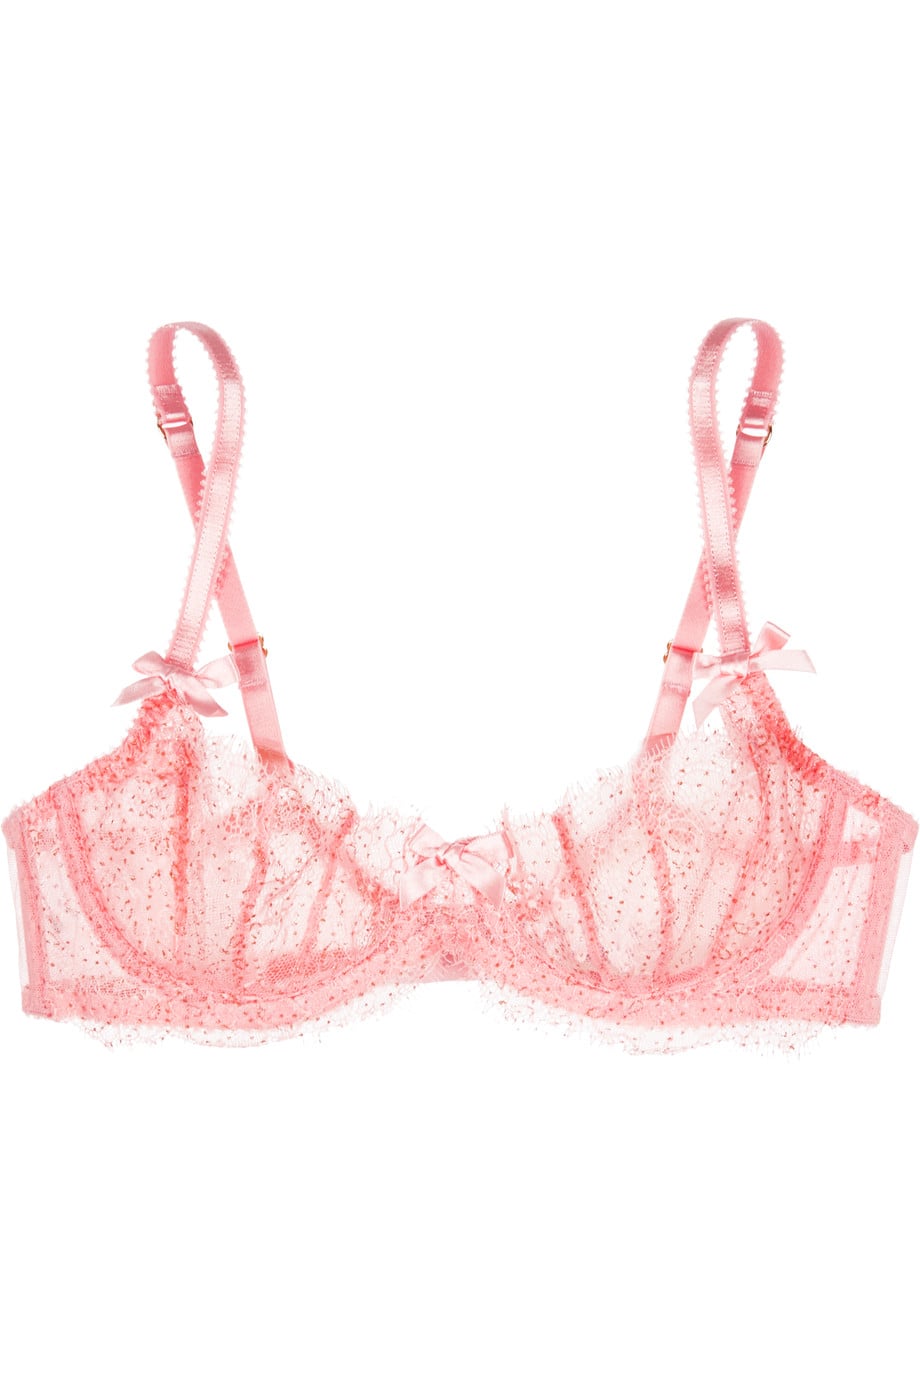 by Agent Provocateur Grace Stretch-Tulle and Lace | Your Inner Girlie Girl Will Flip For Pink Gifts POPSUGAR Fashion Photo 20